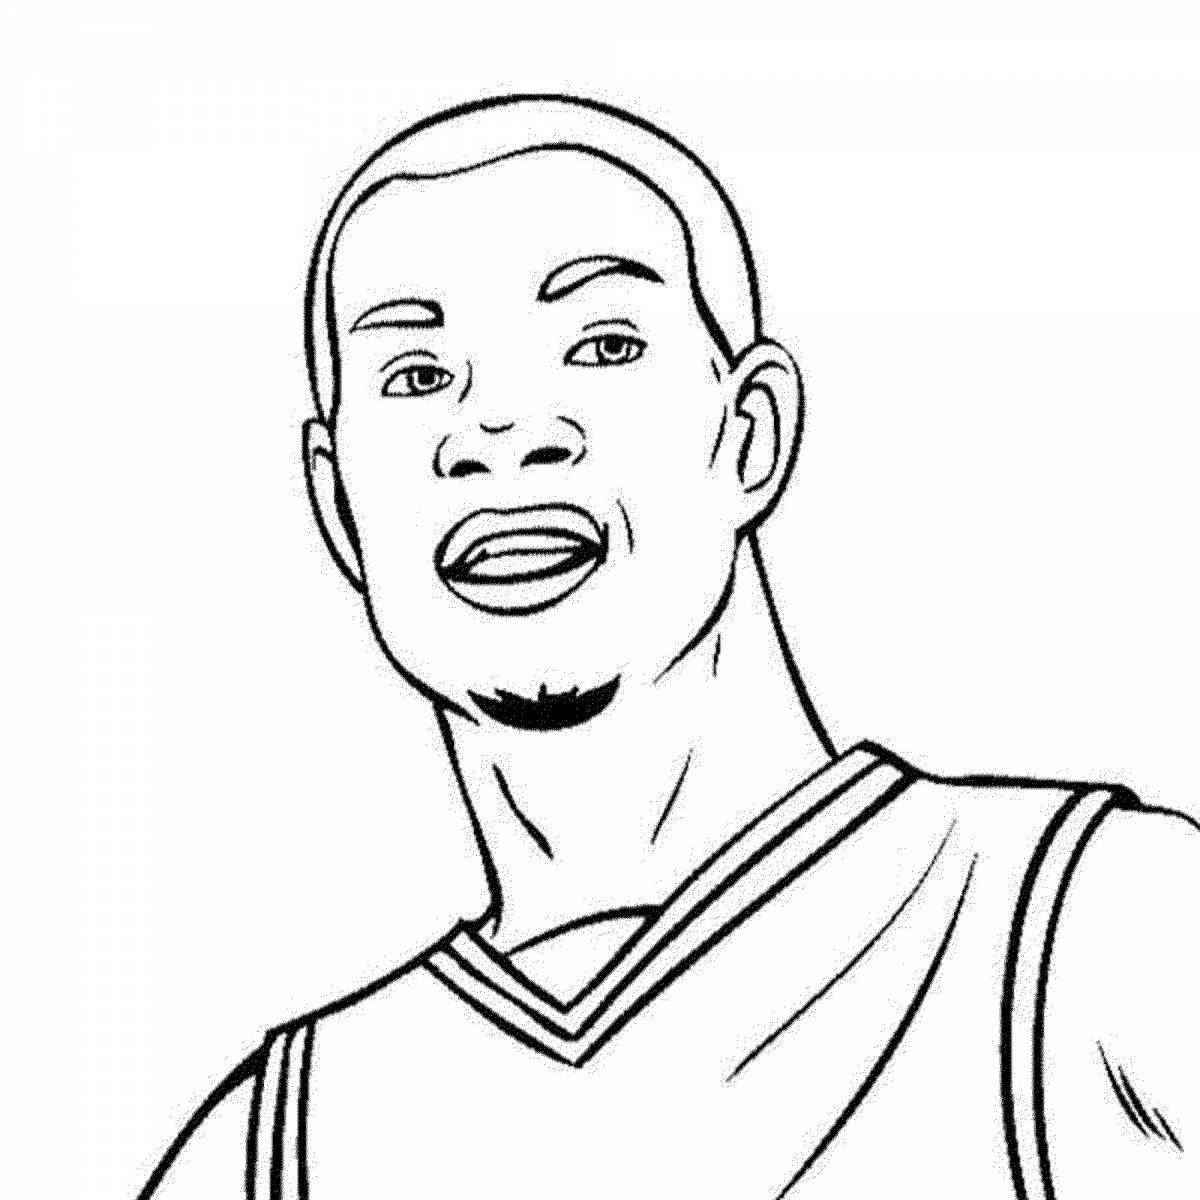 Lebron james' outstanding coloring book